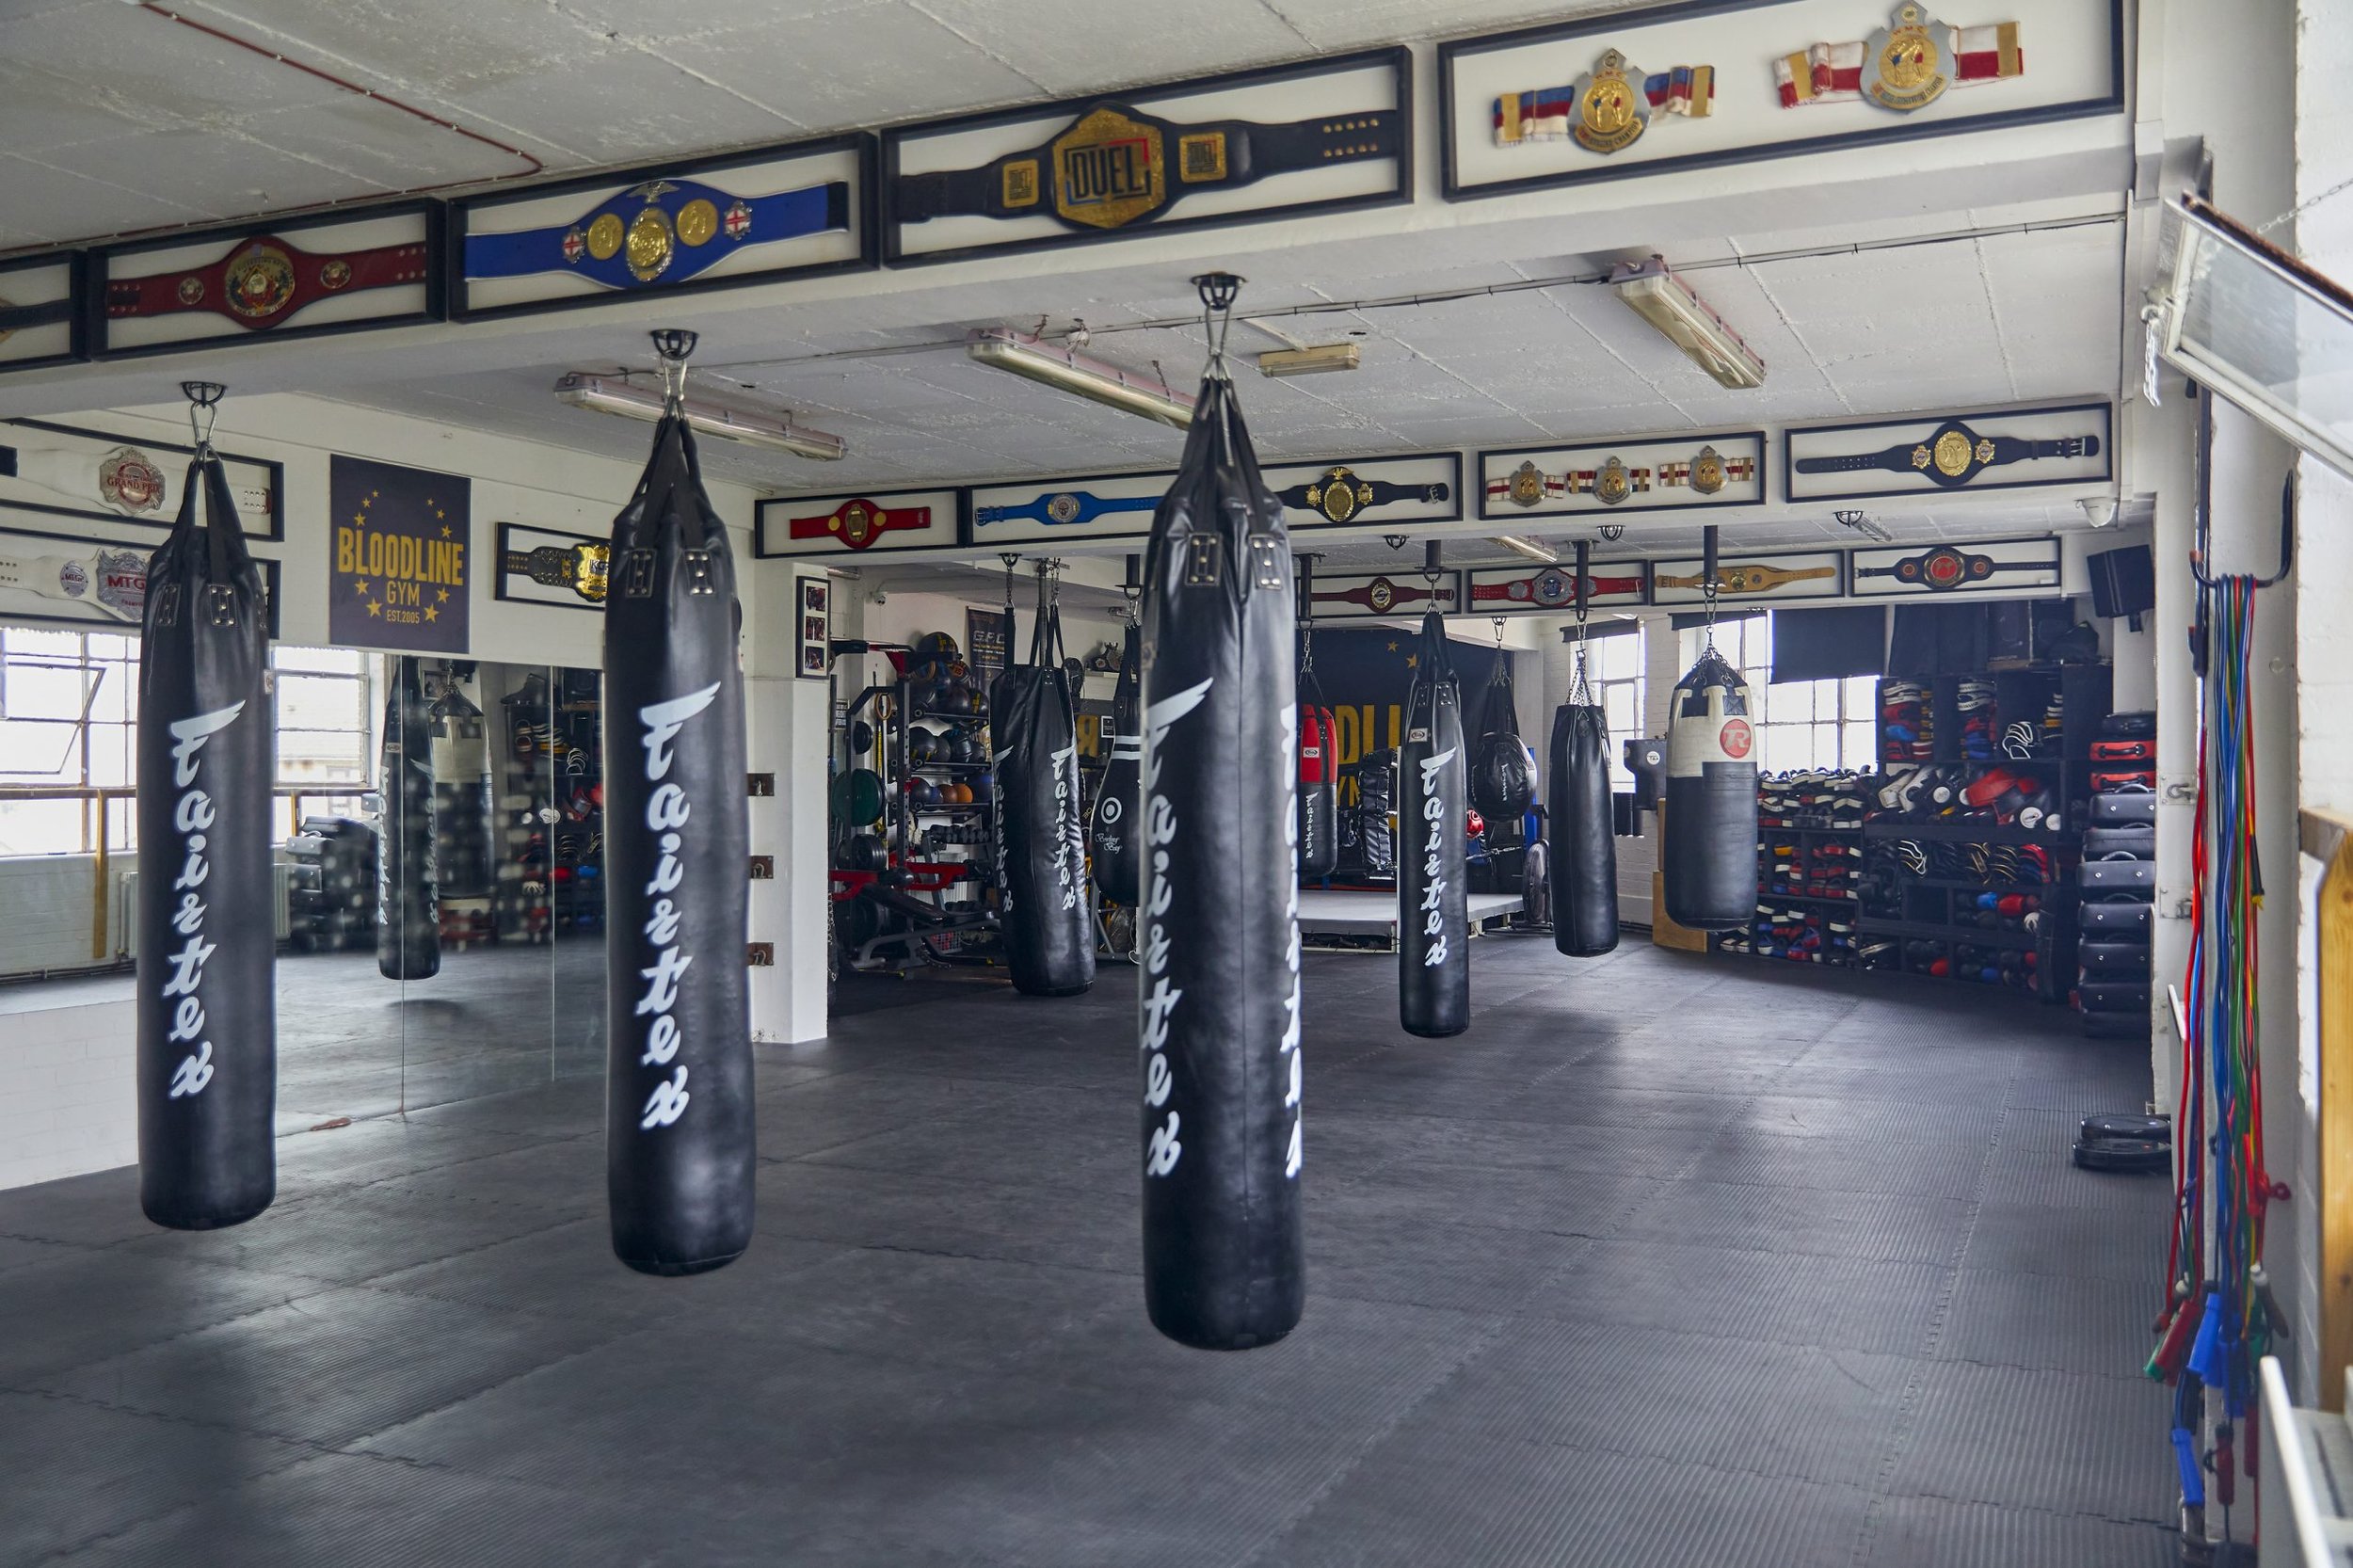 Muay Thai London Central By Thai instructor for beginners